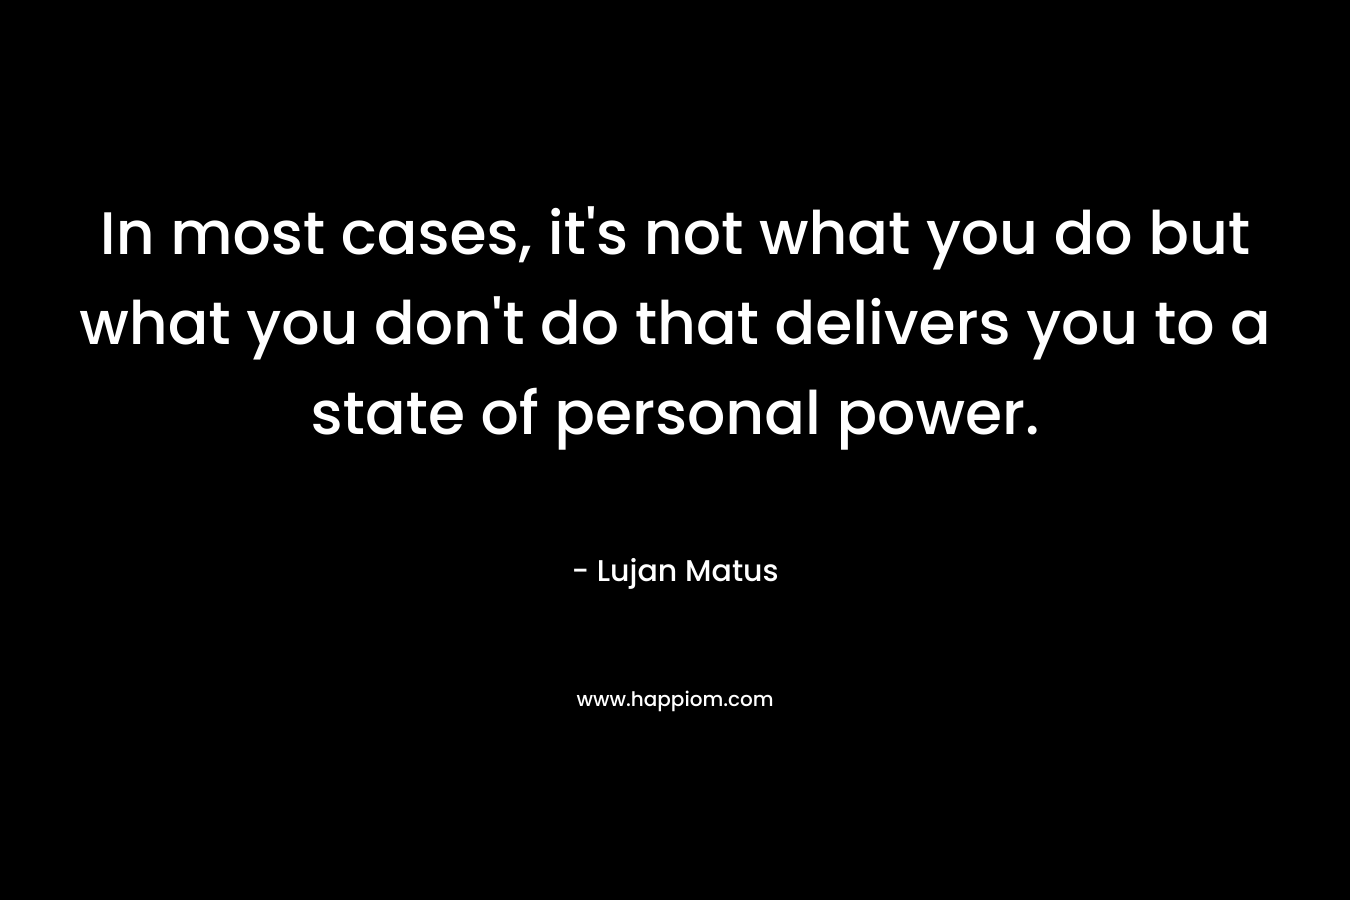 In most cases, it's not what you do but what you don't do that delivers you to a state of personal power.